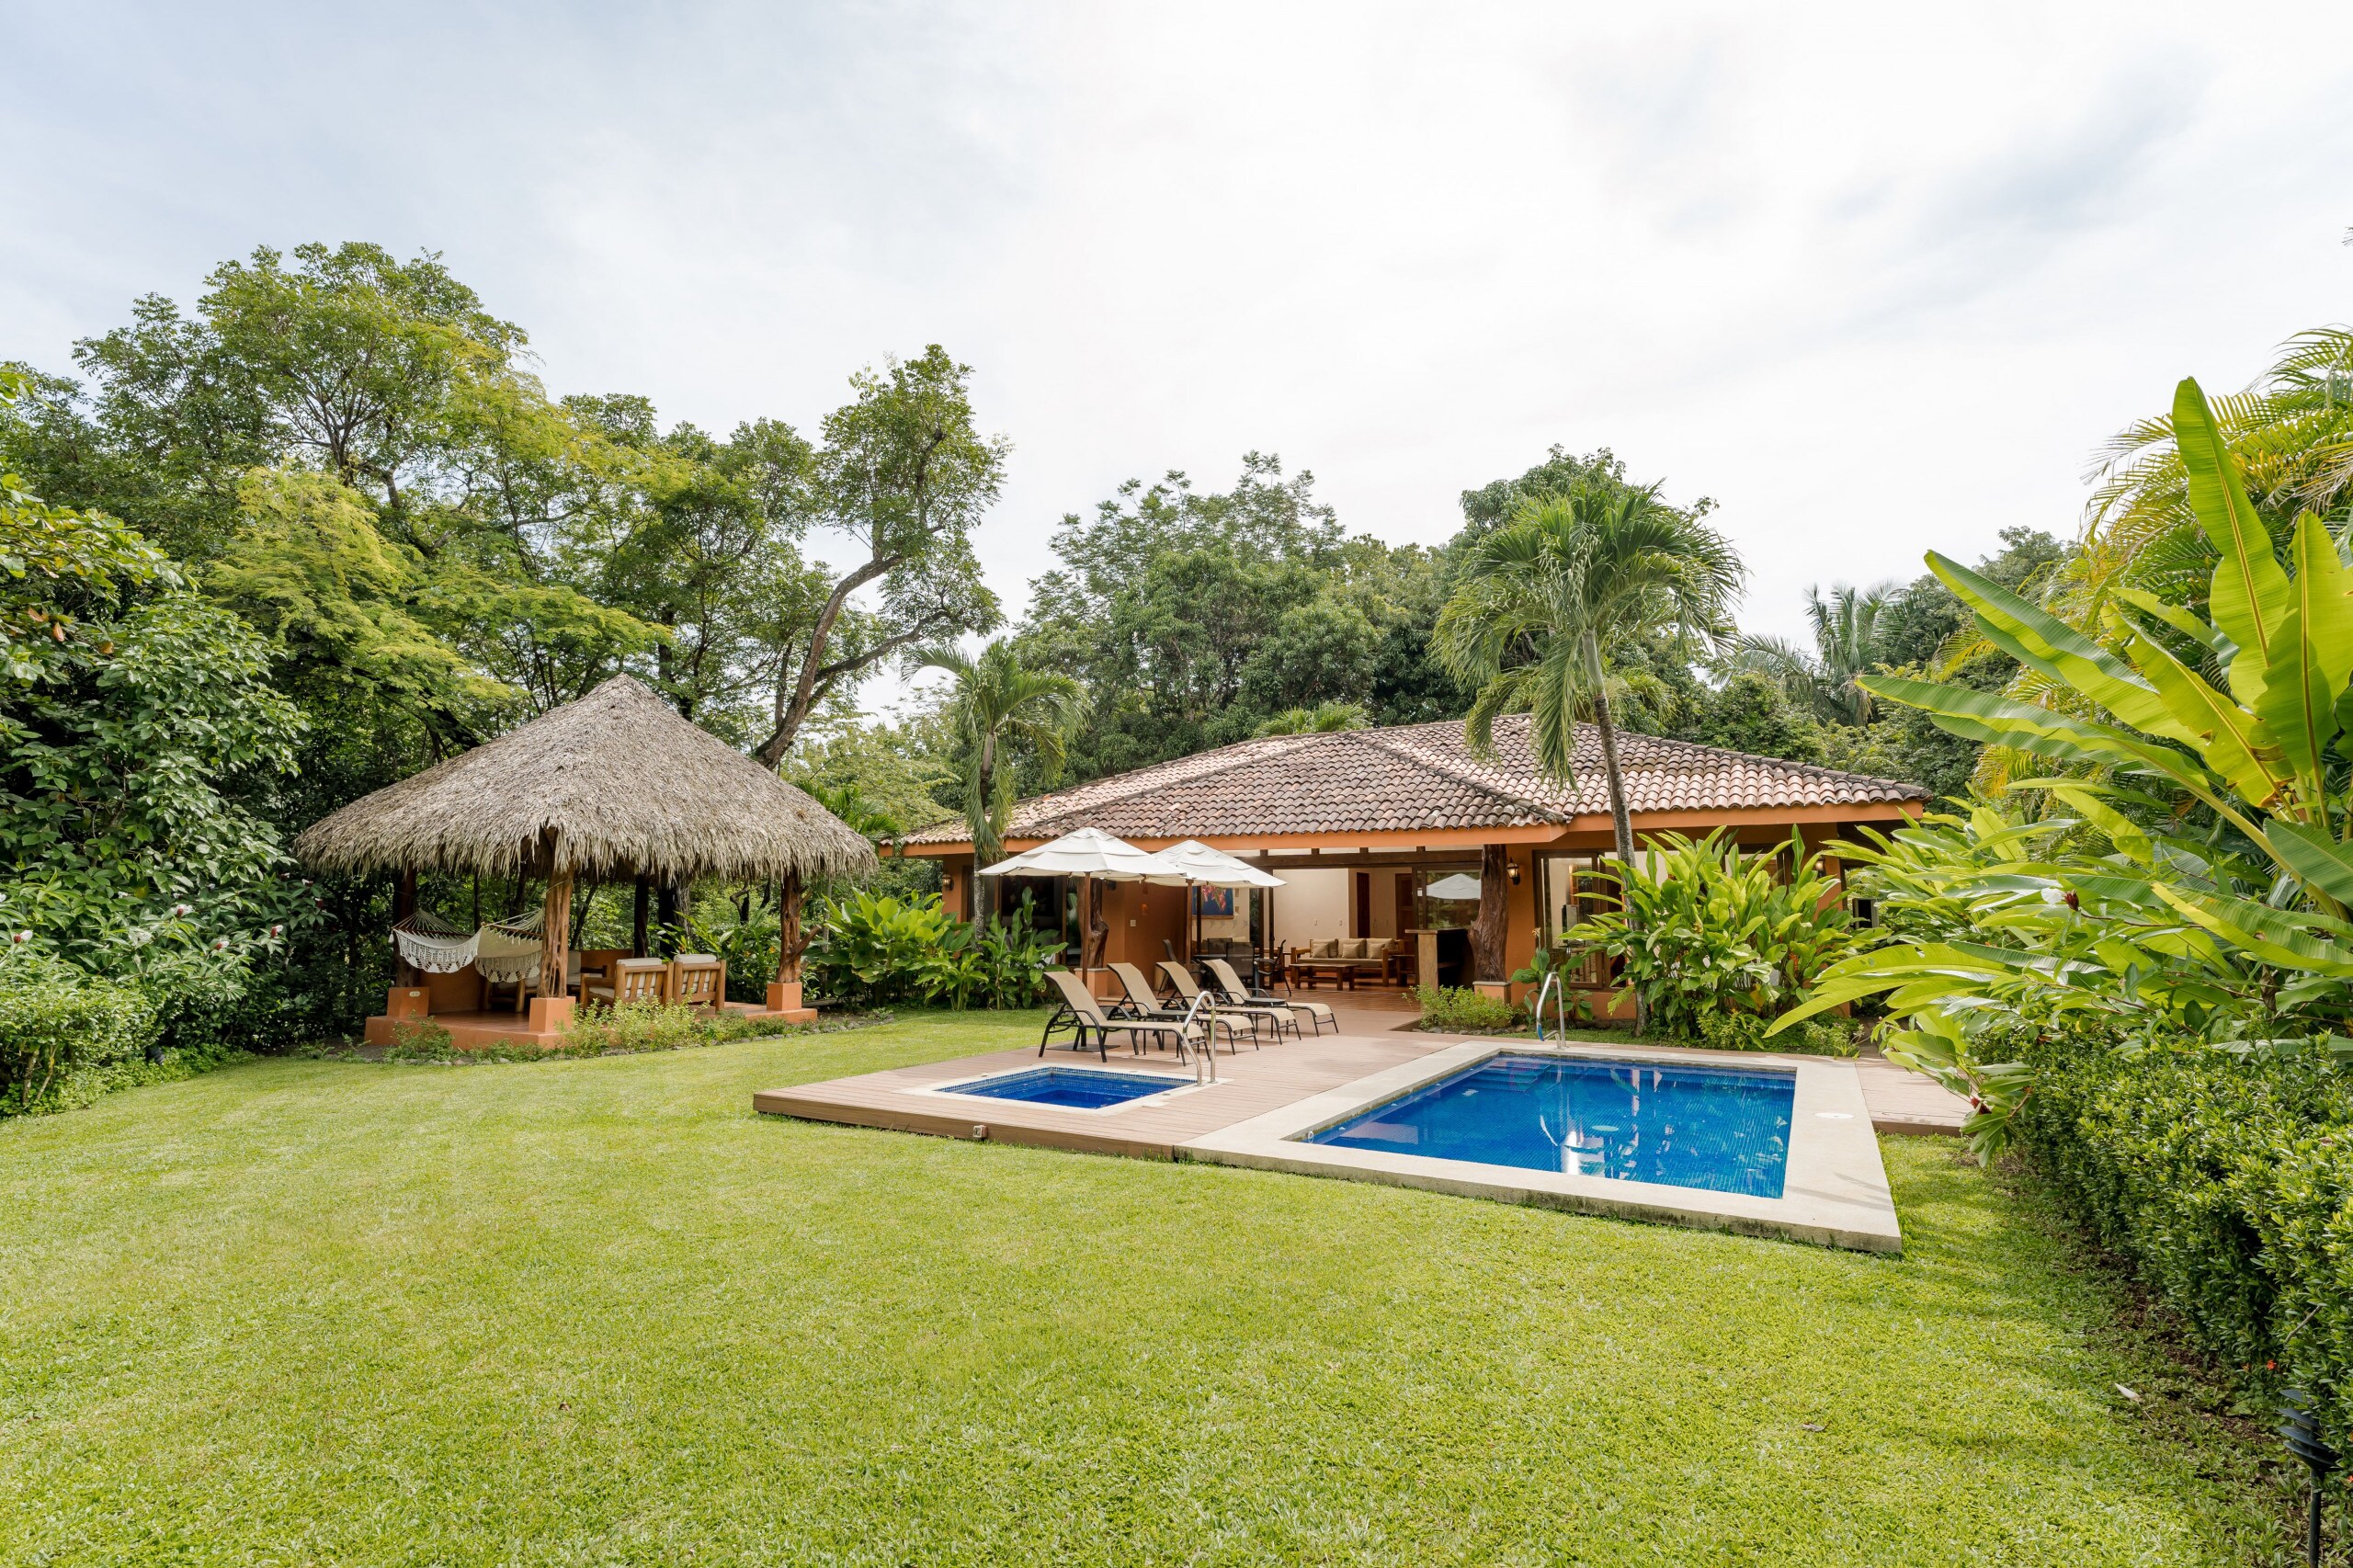 Property Image 1 - Golf 2, charming, private, and rustic-style 3 bedroom villa in the middle of nature